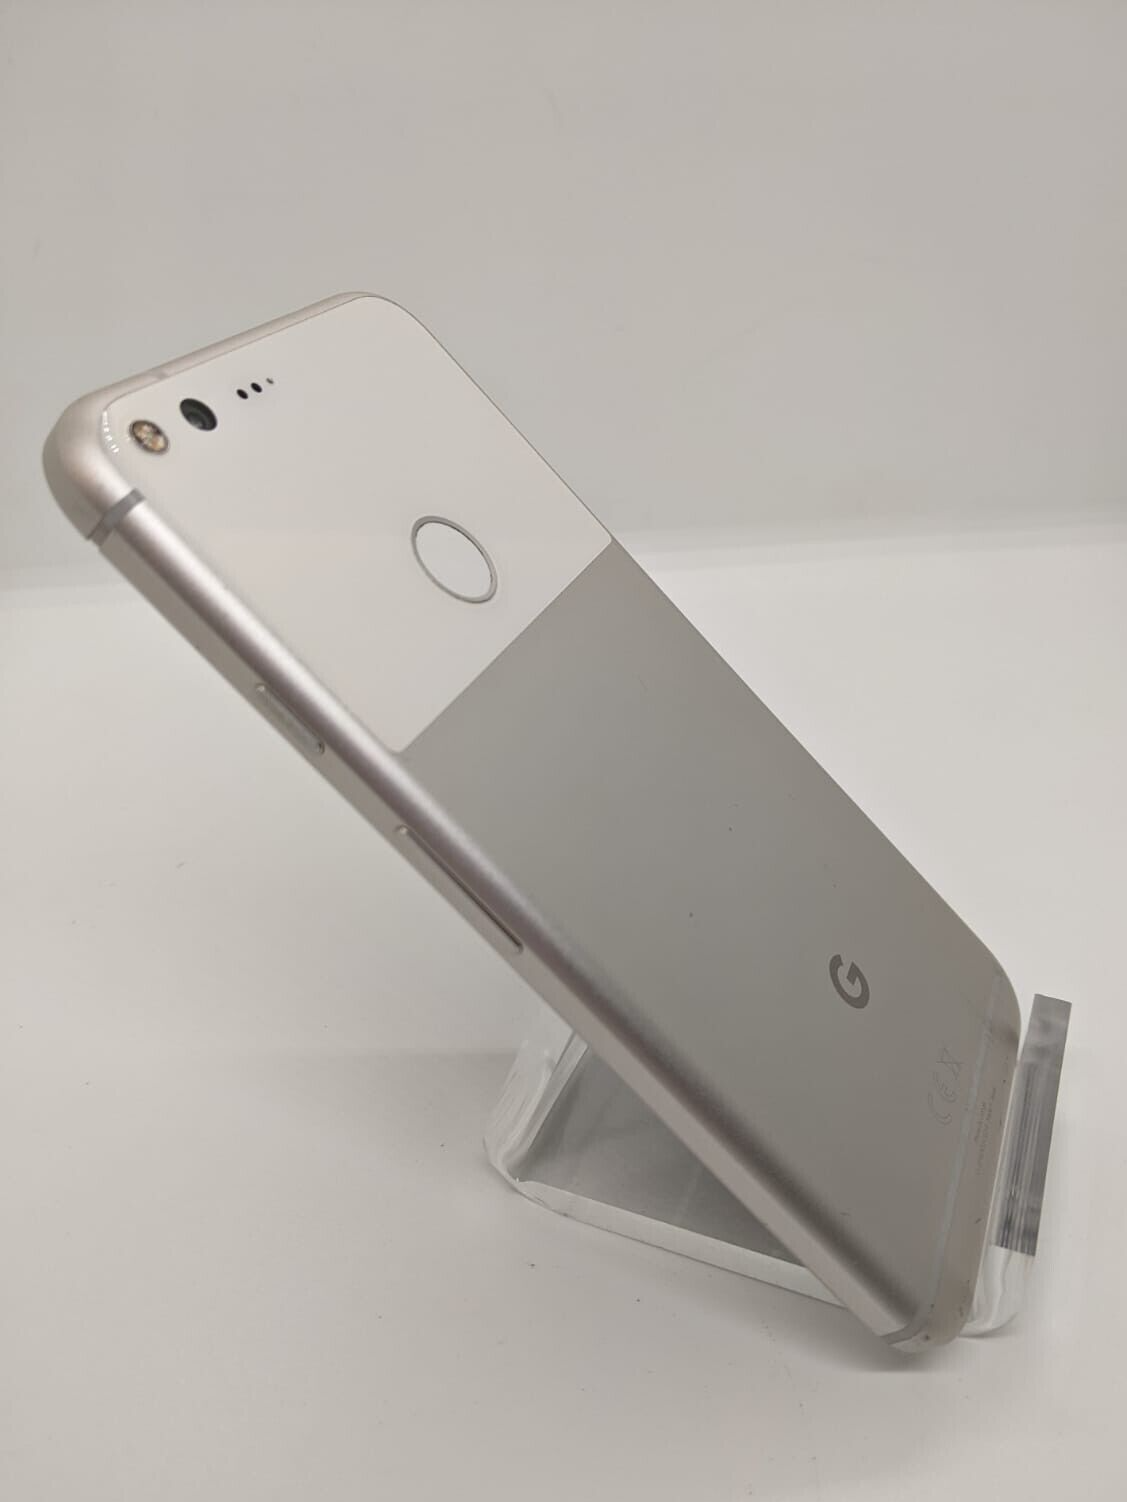 Google Pixel XL 128GB Unlocked Smartphone 2PW2100 Silver FOR PARTS WORKING